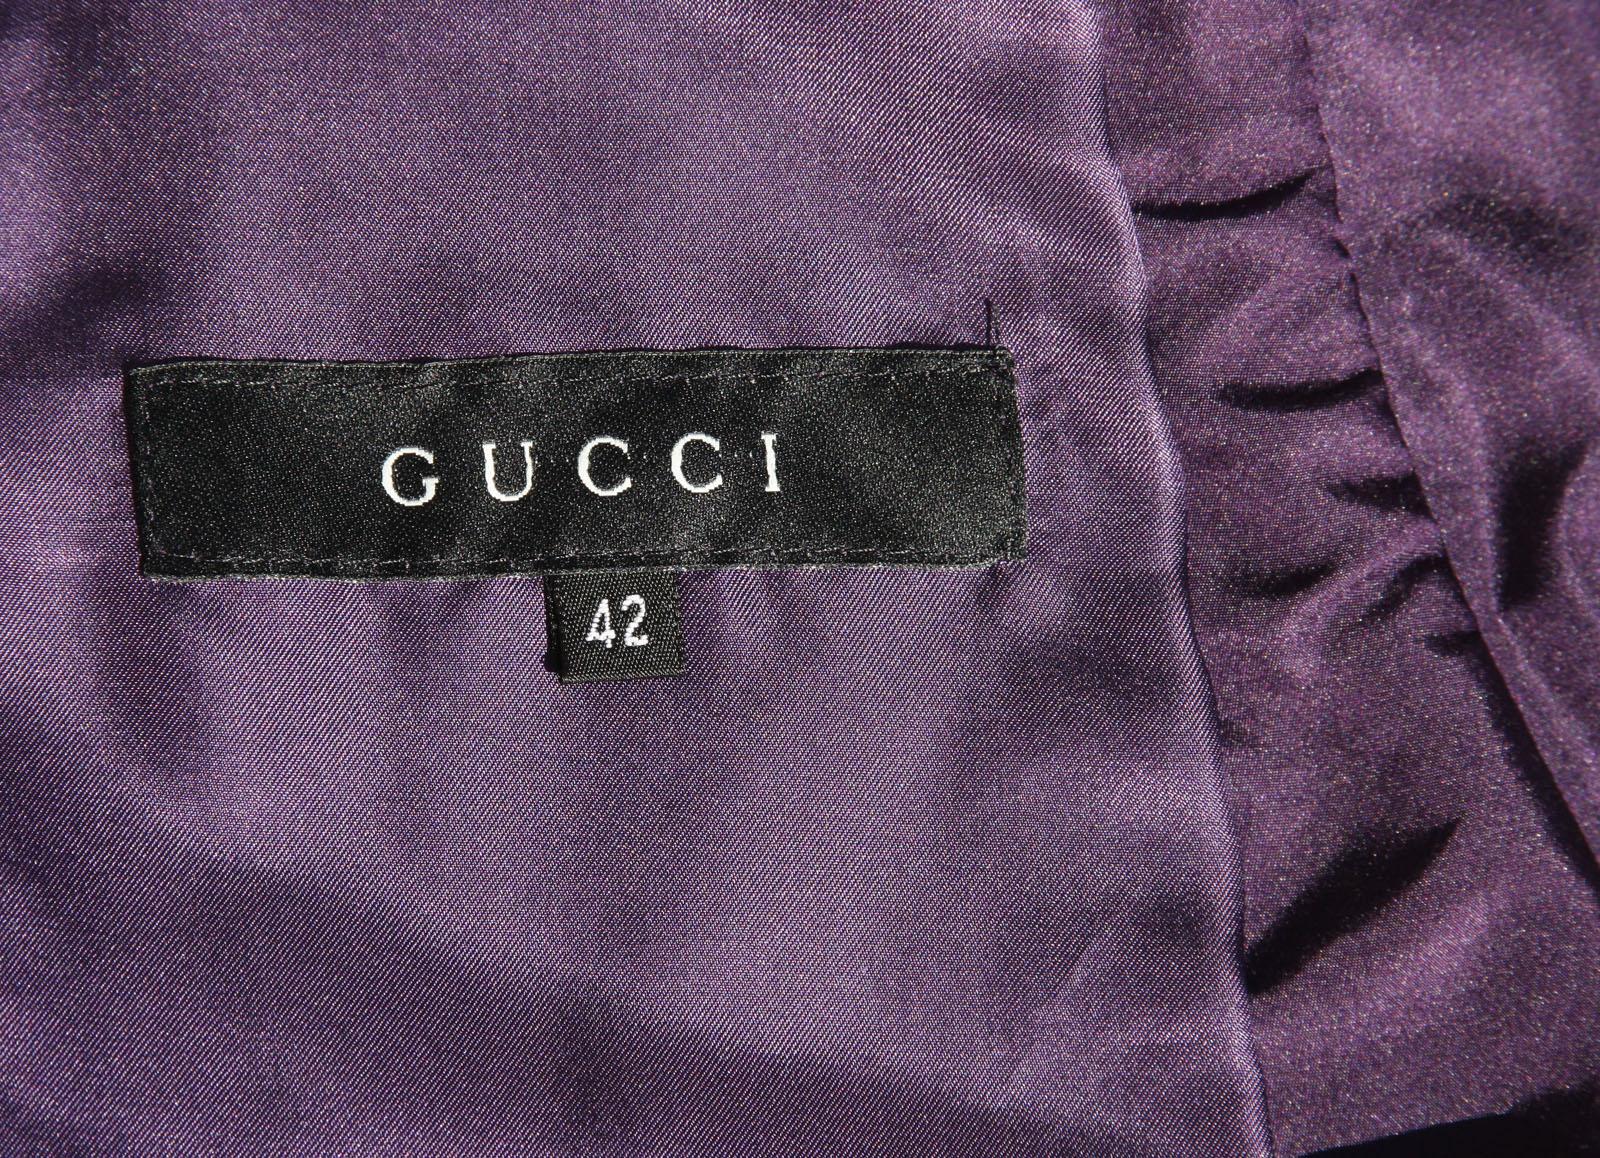 Tom Ford for Gucci F/W 2004 Runway Collection Purple Silk Taffeta Jacket 42 - 6 For Sale 2